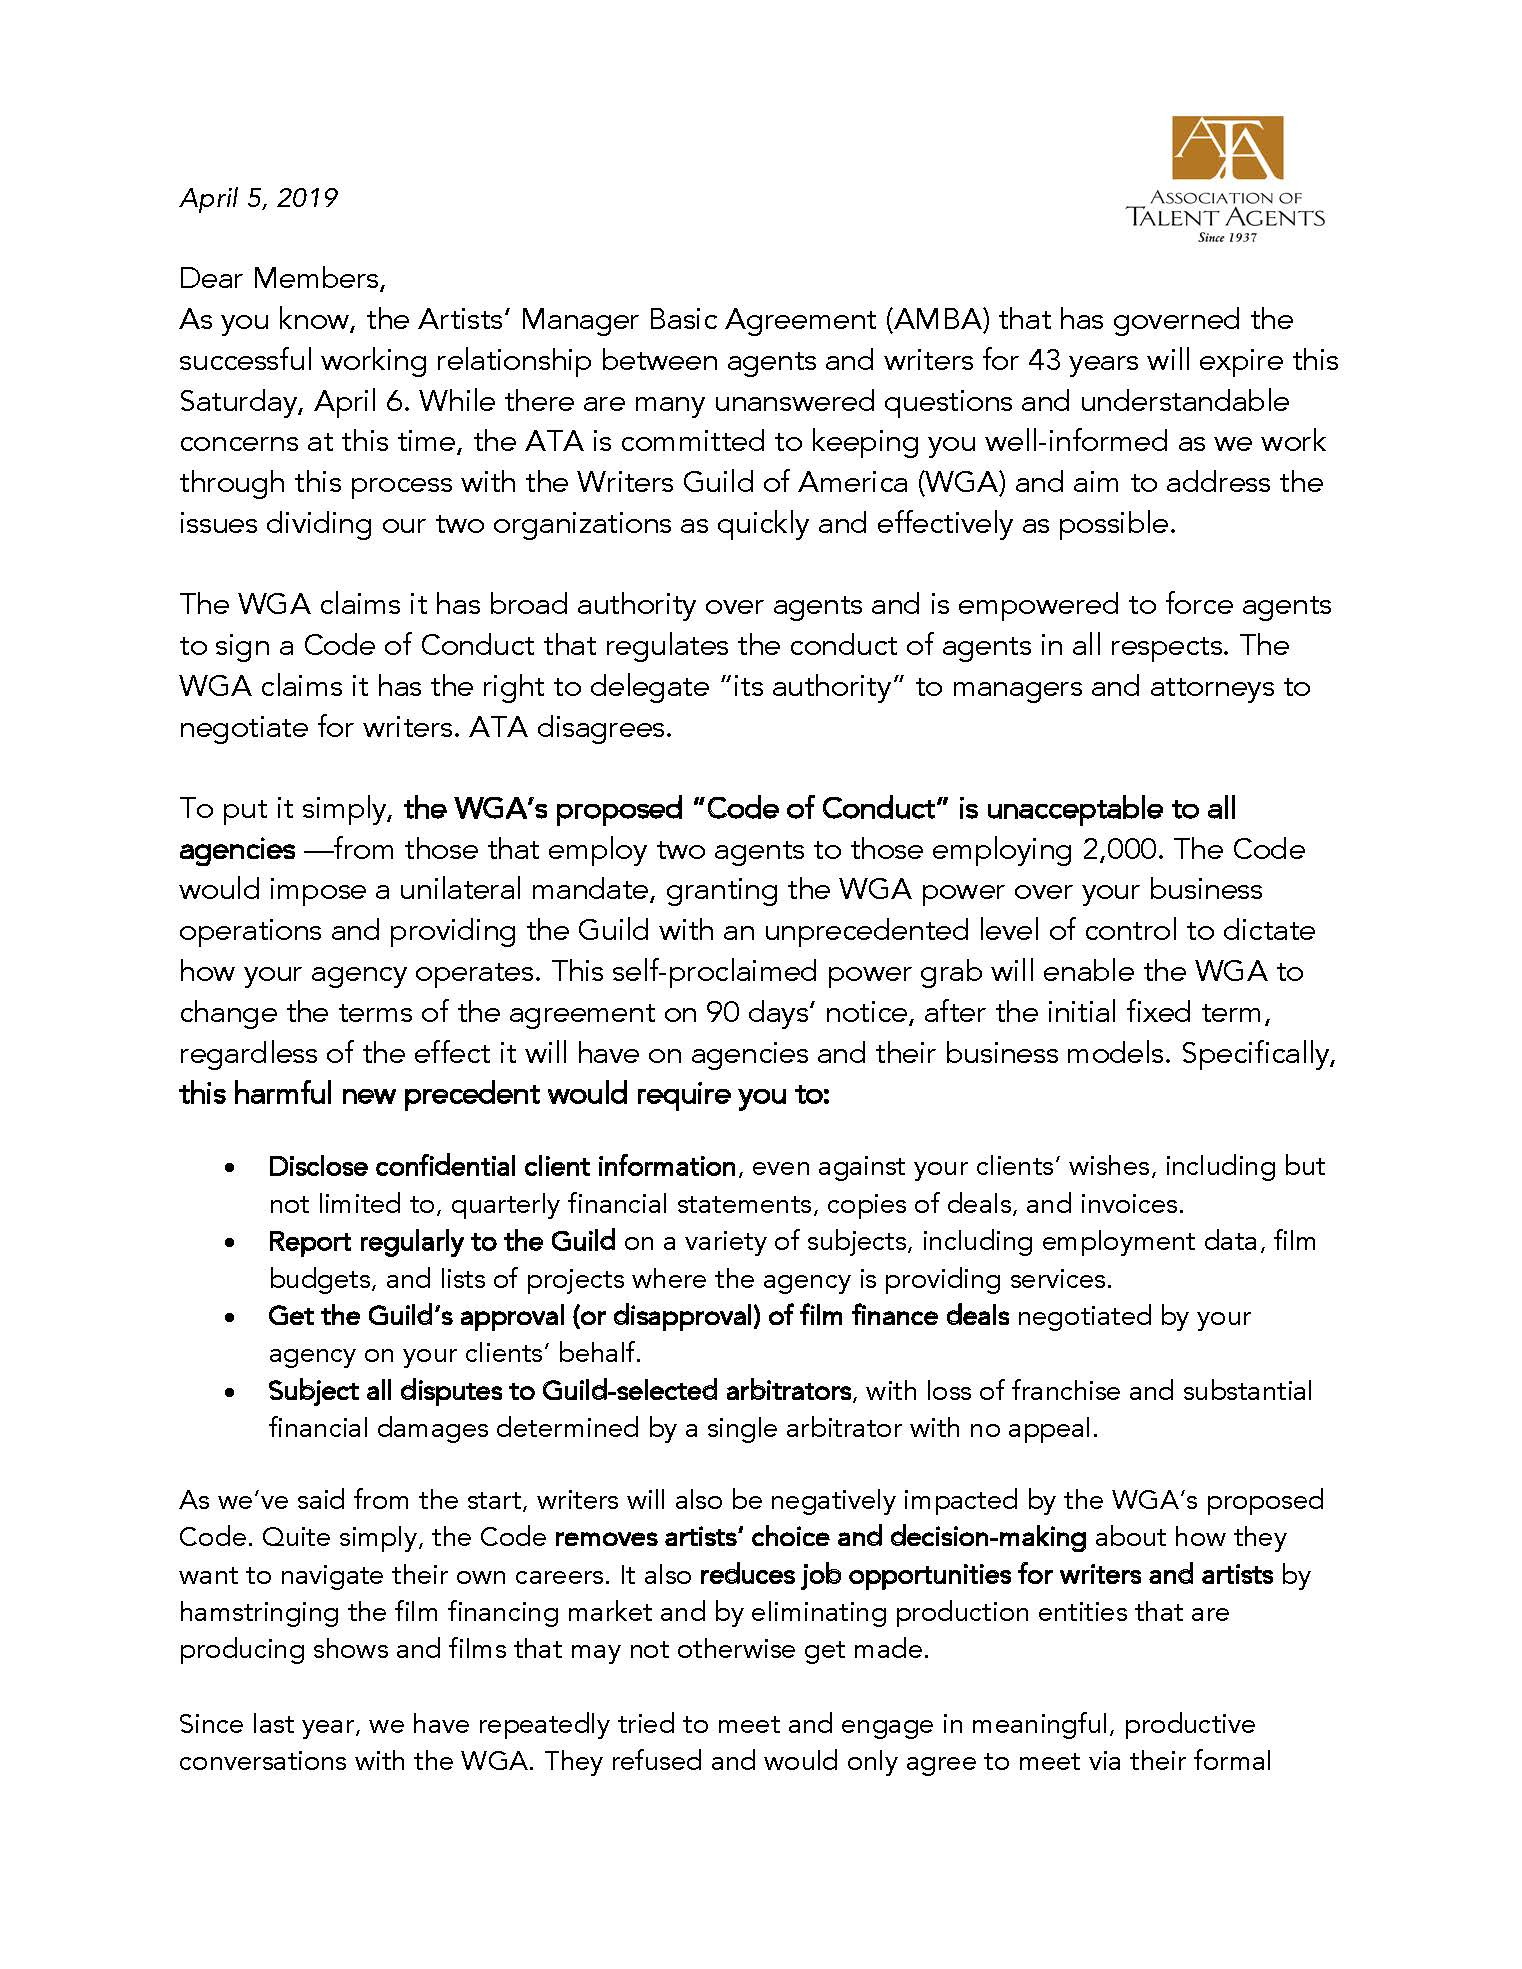 Wga Basic Agreement Association Of Talent Agents 2019 Artists Manager Basic Agreement